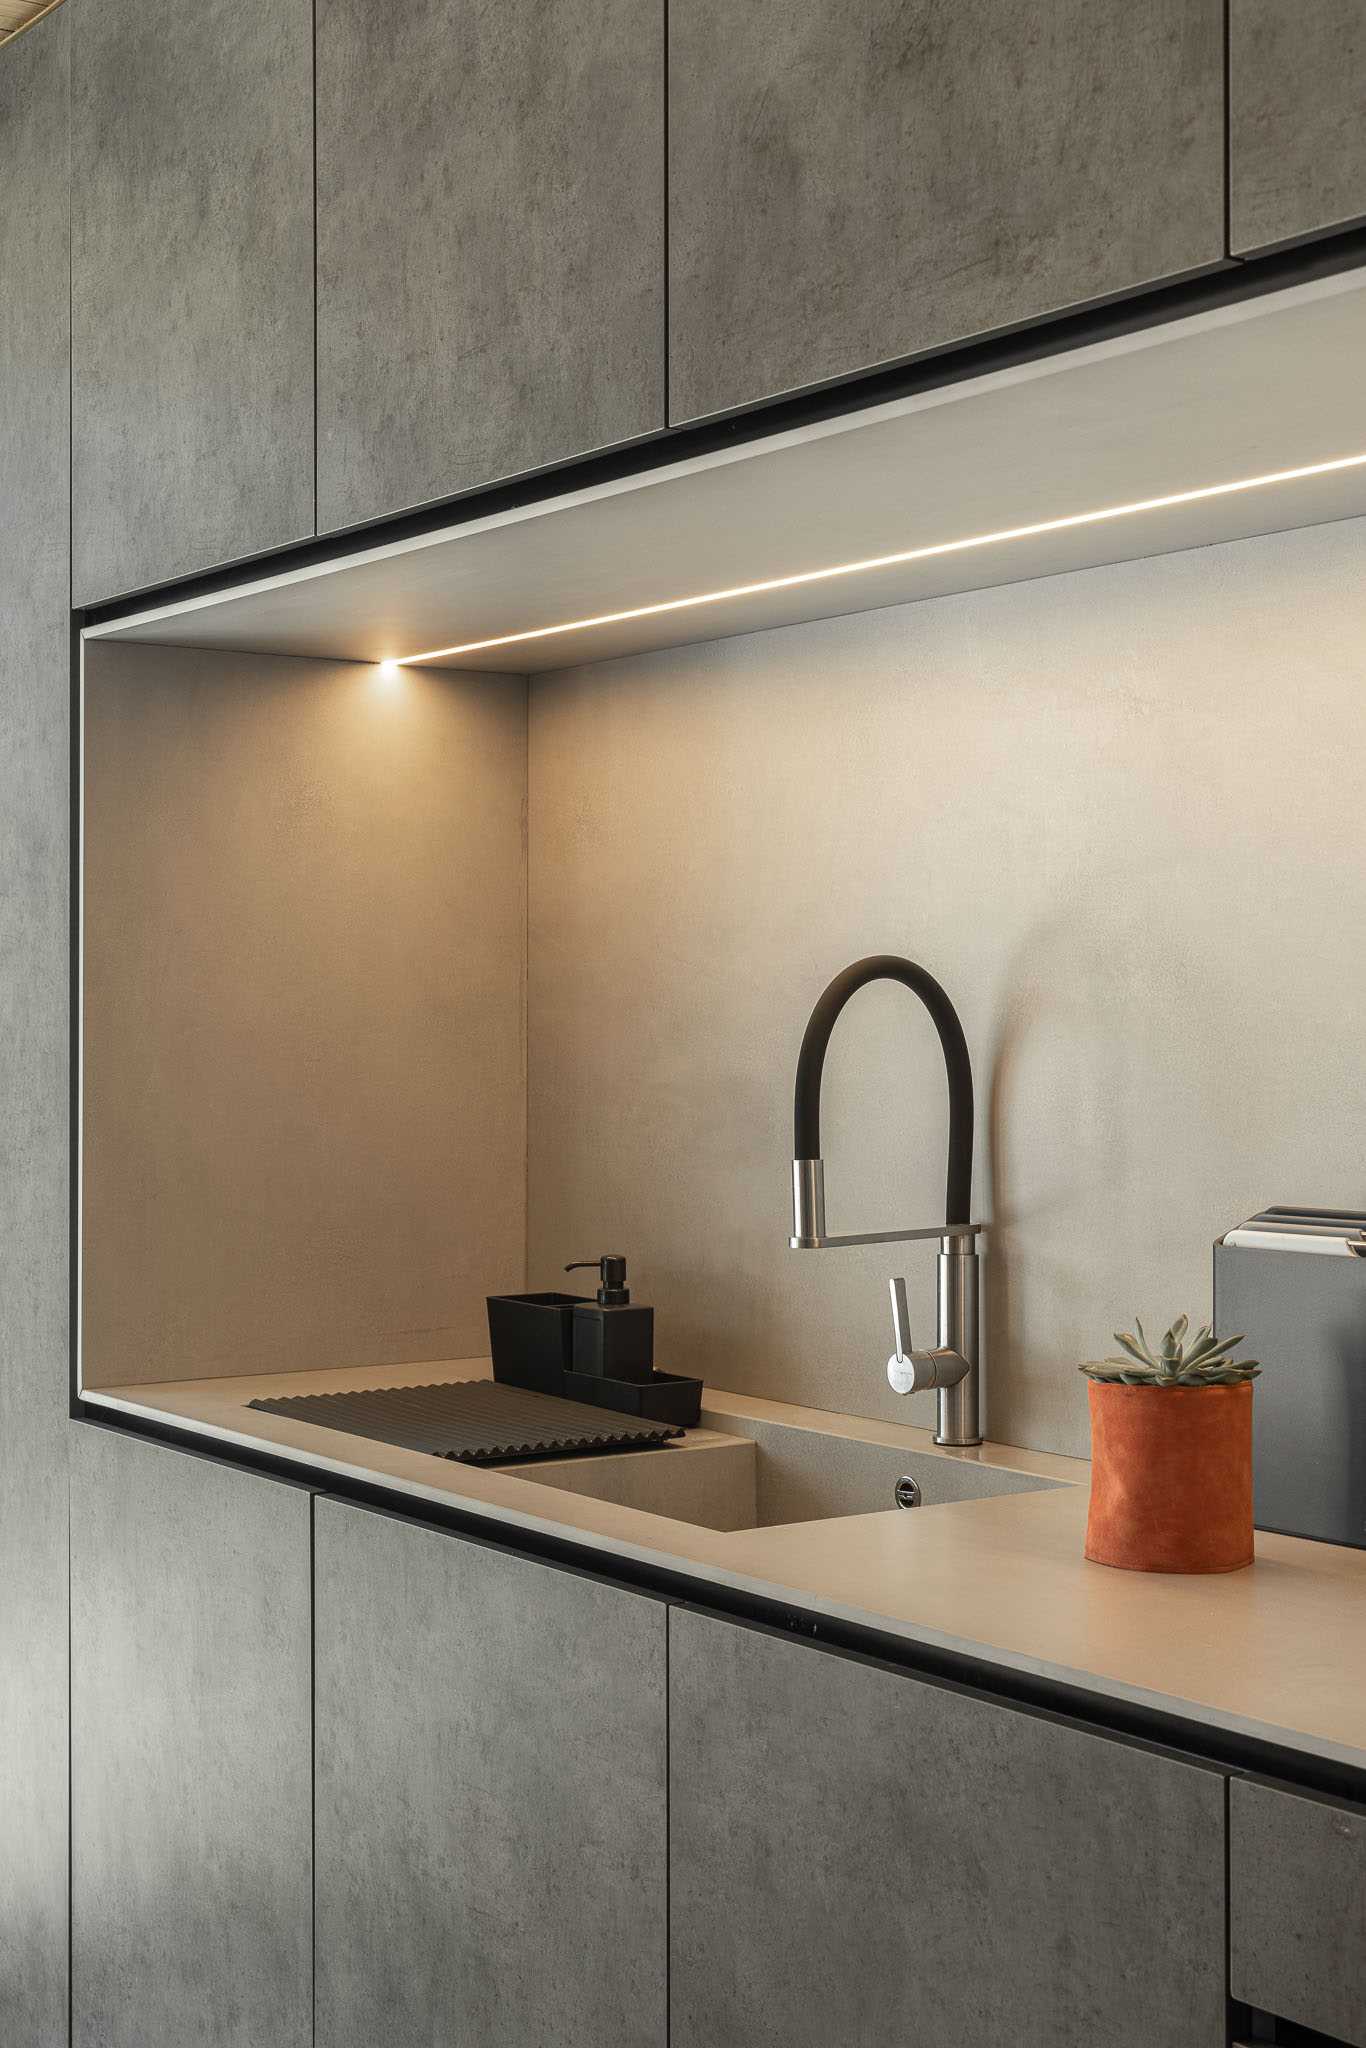 A modern kitchen with a built-in light about the kitchen.